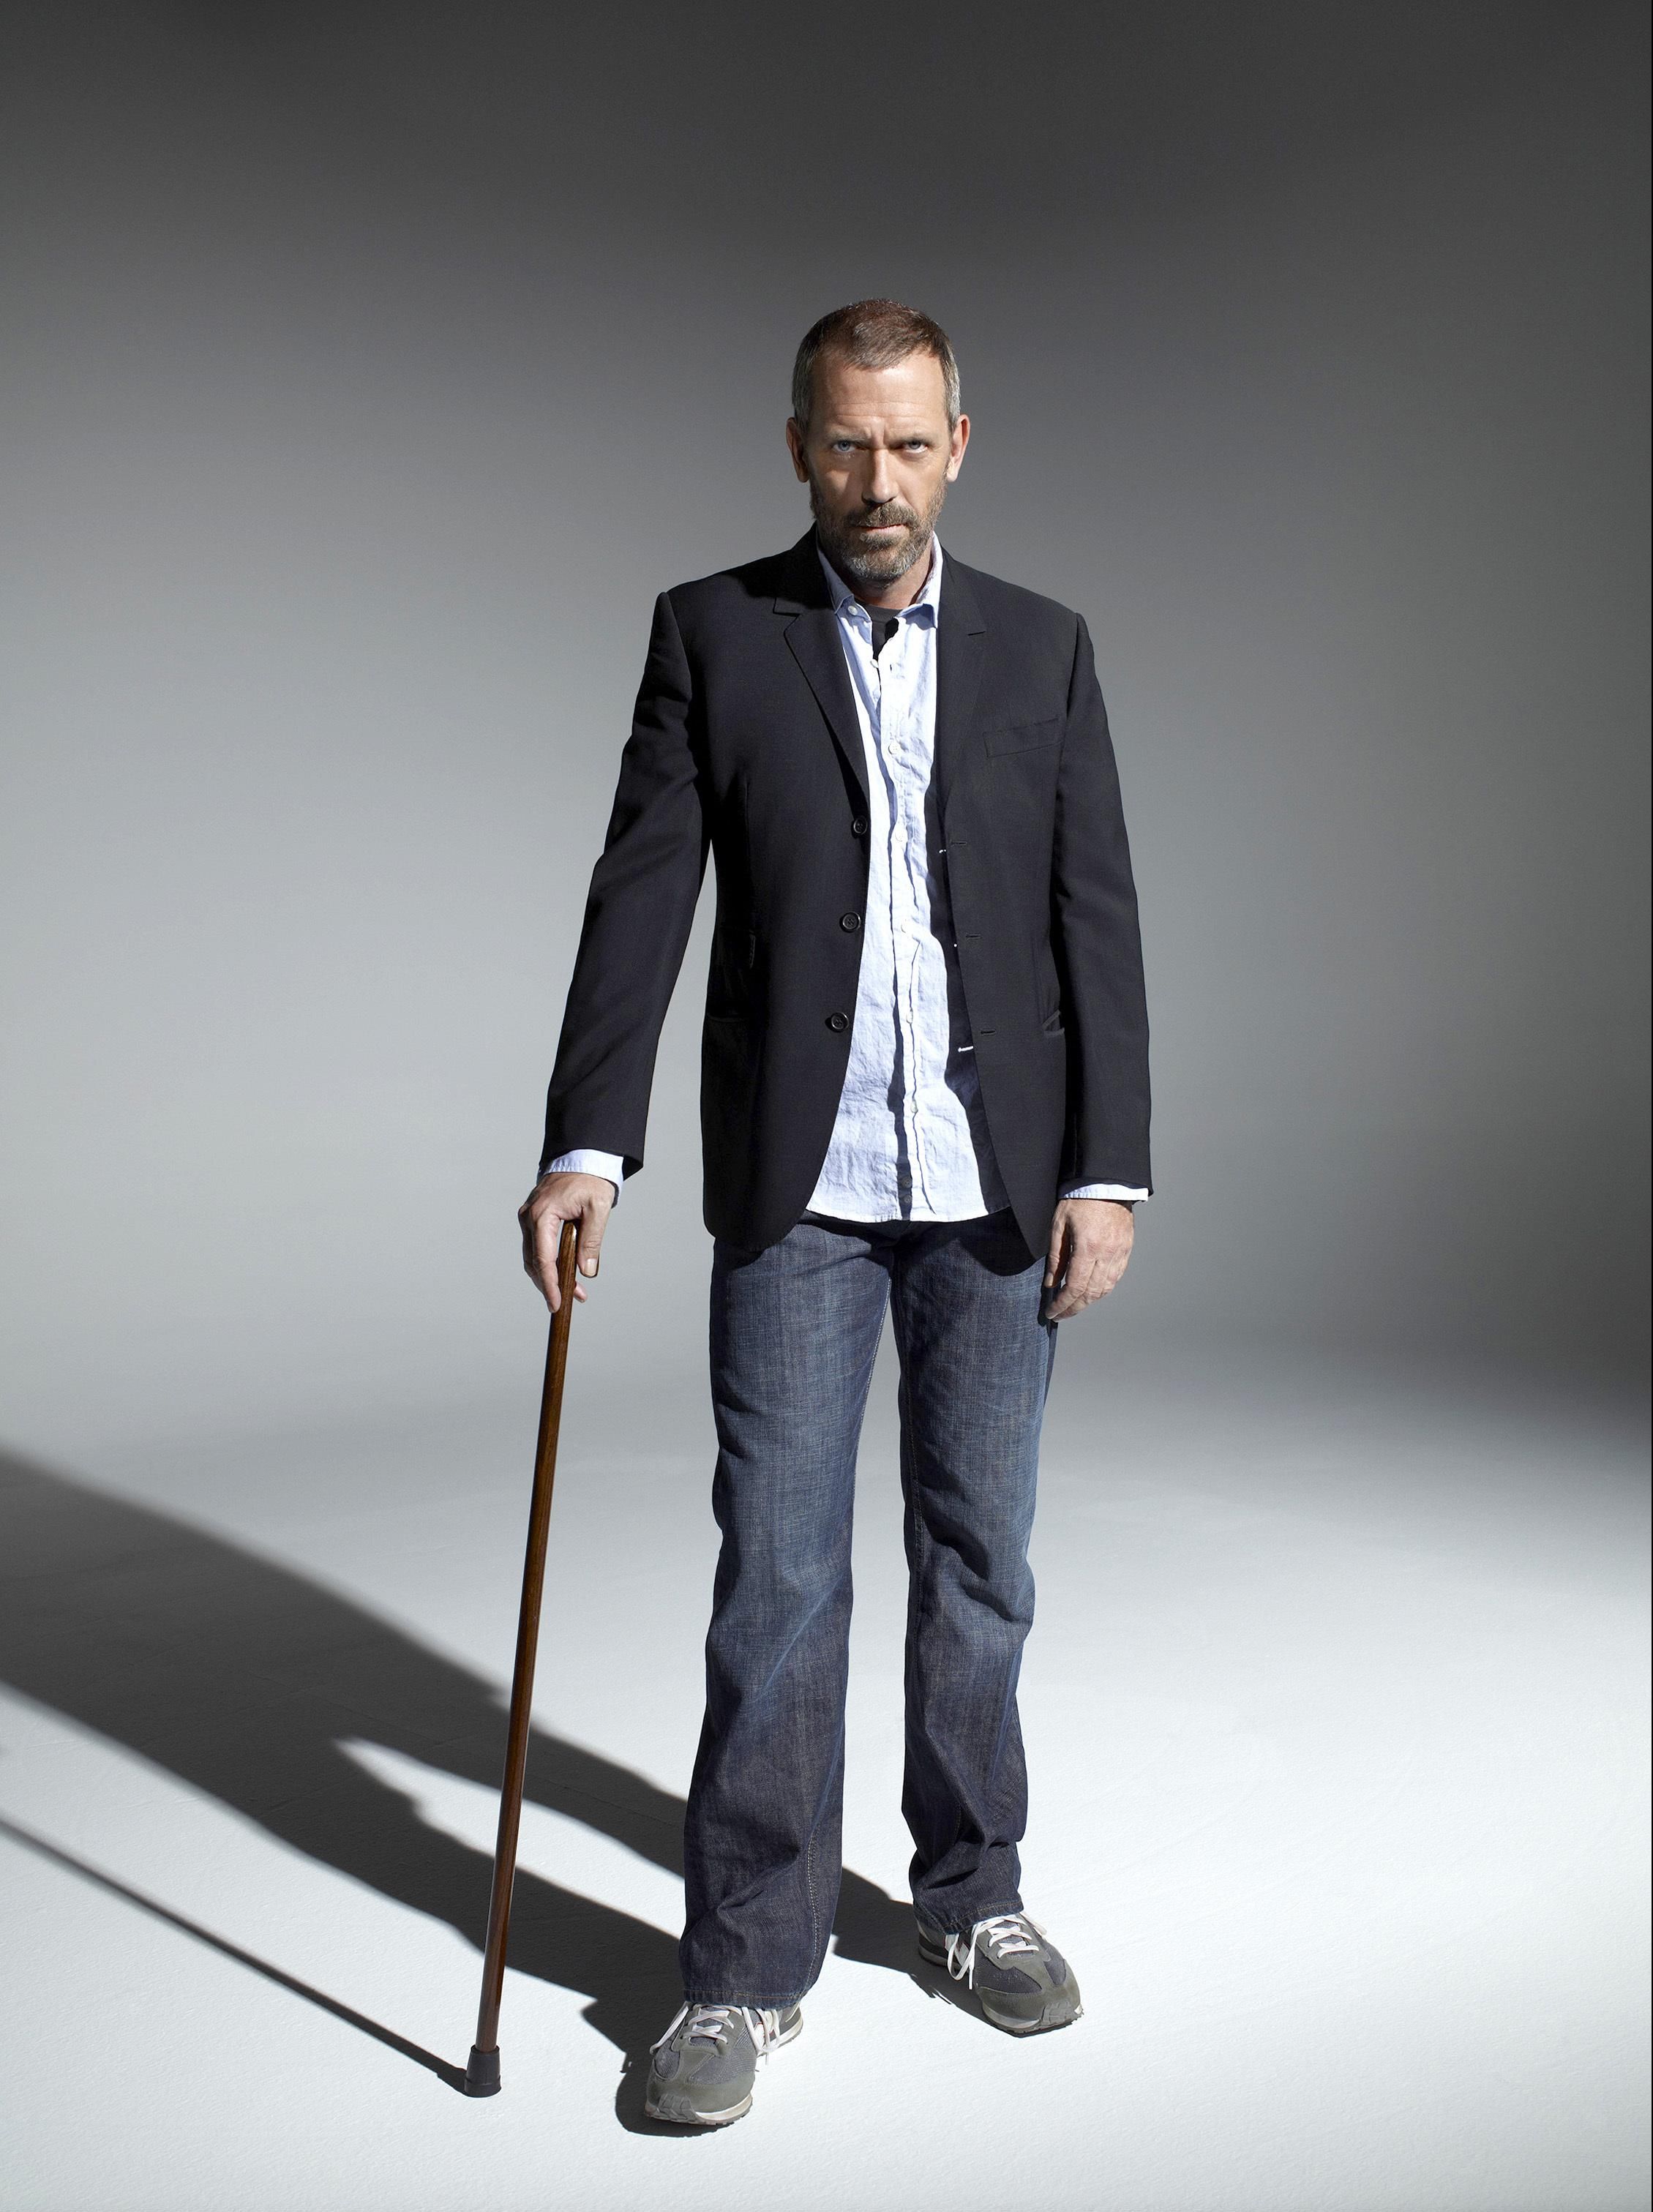 Actor named Hugh Laurie is standing with the walking stick. The background is grey, the actor wears black jacket, light blue shirt, dark jeans and sneakers. The photo is from photoshoot to Dr House.